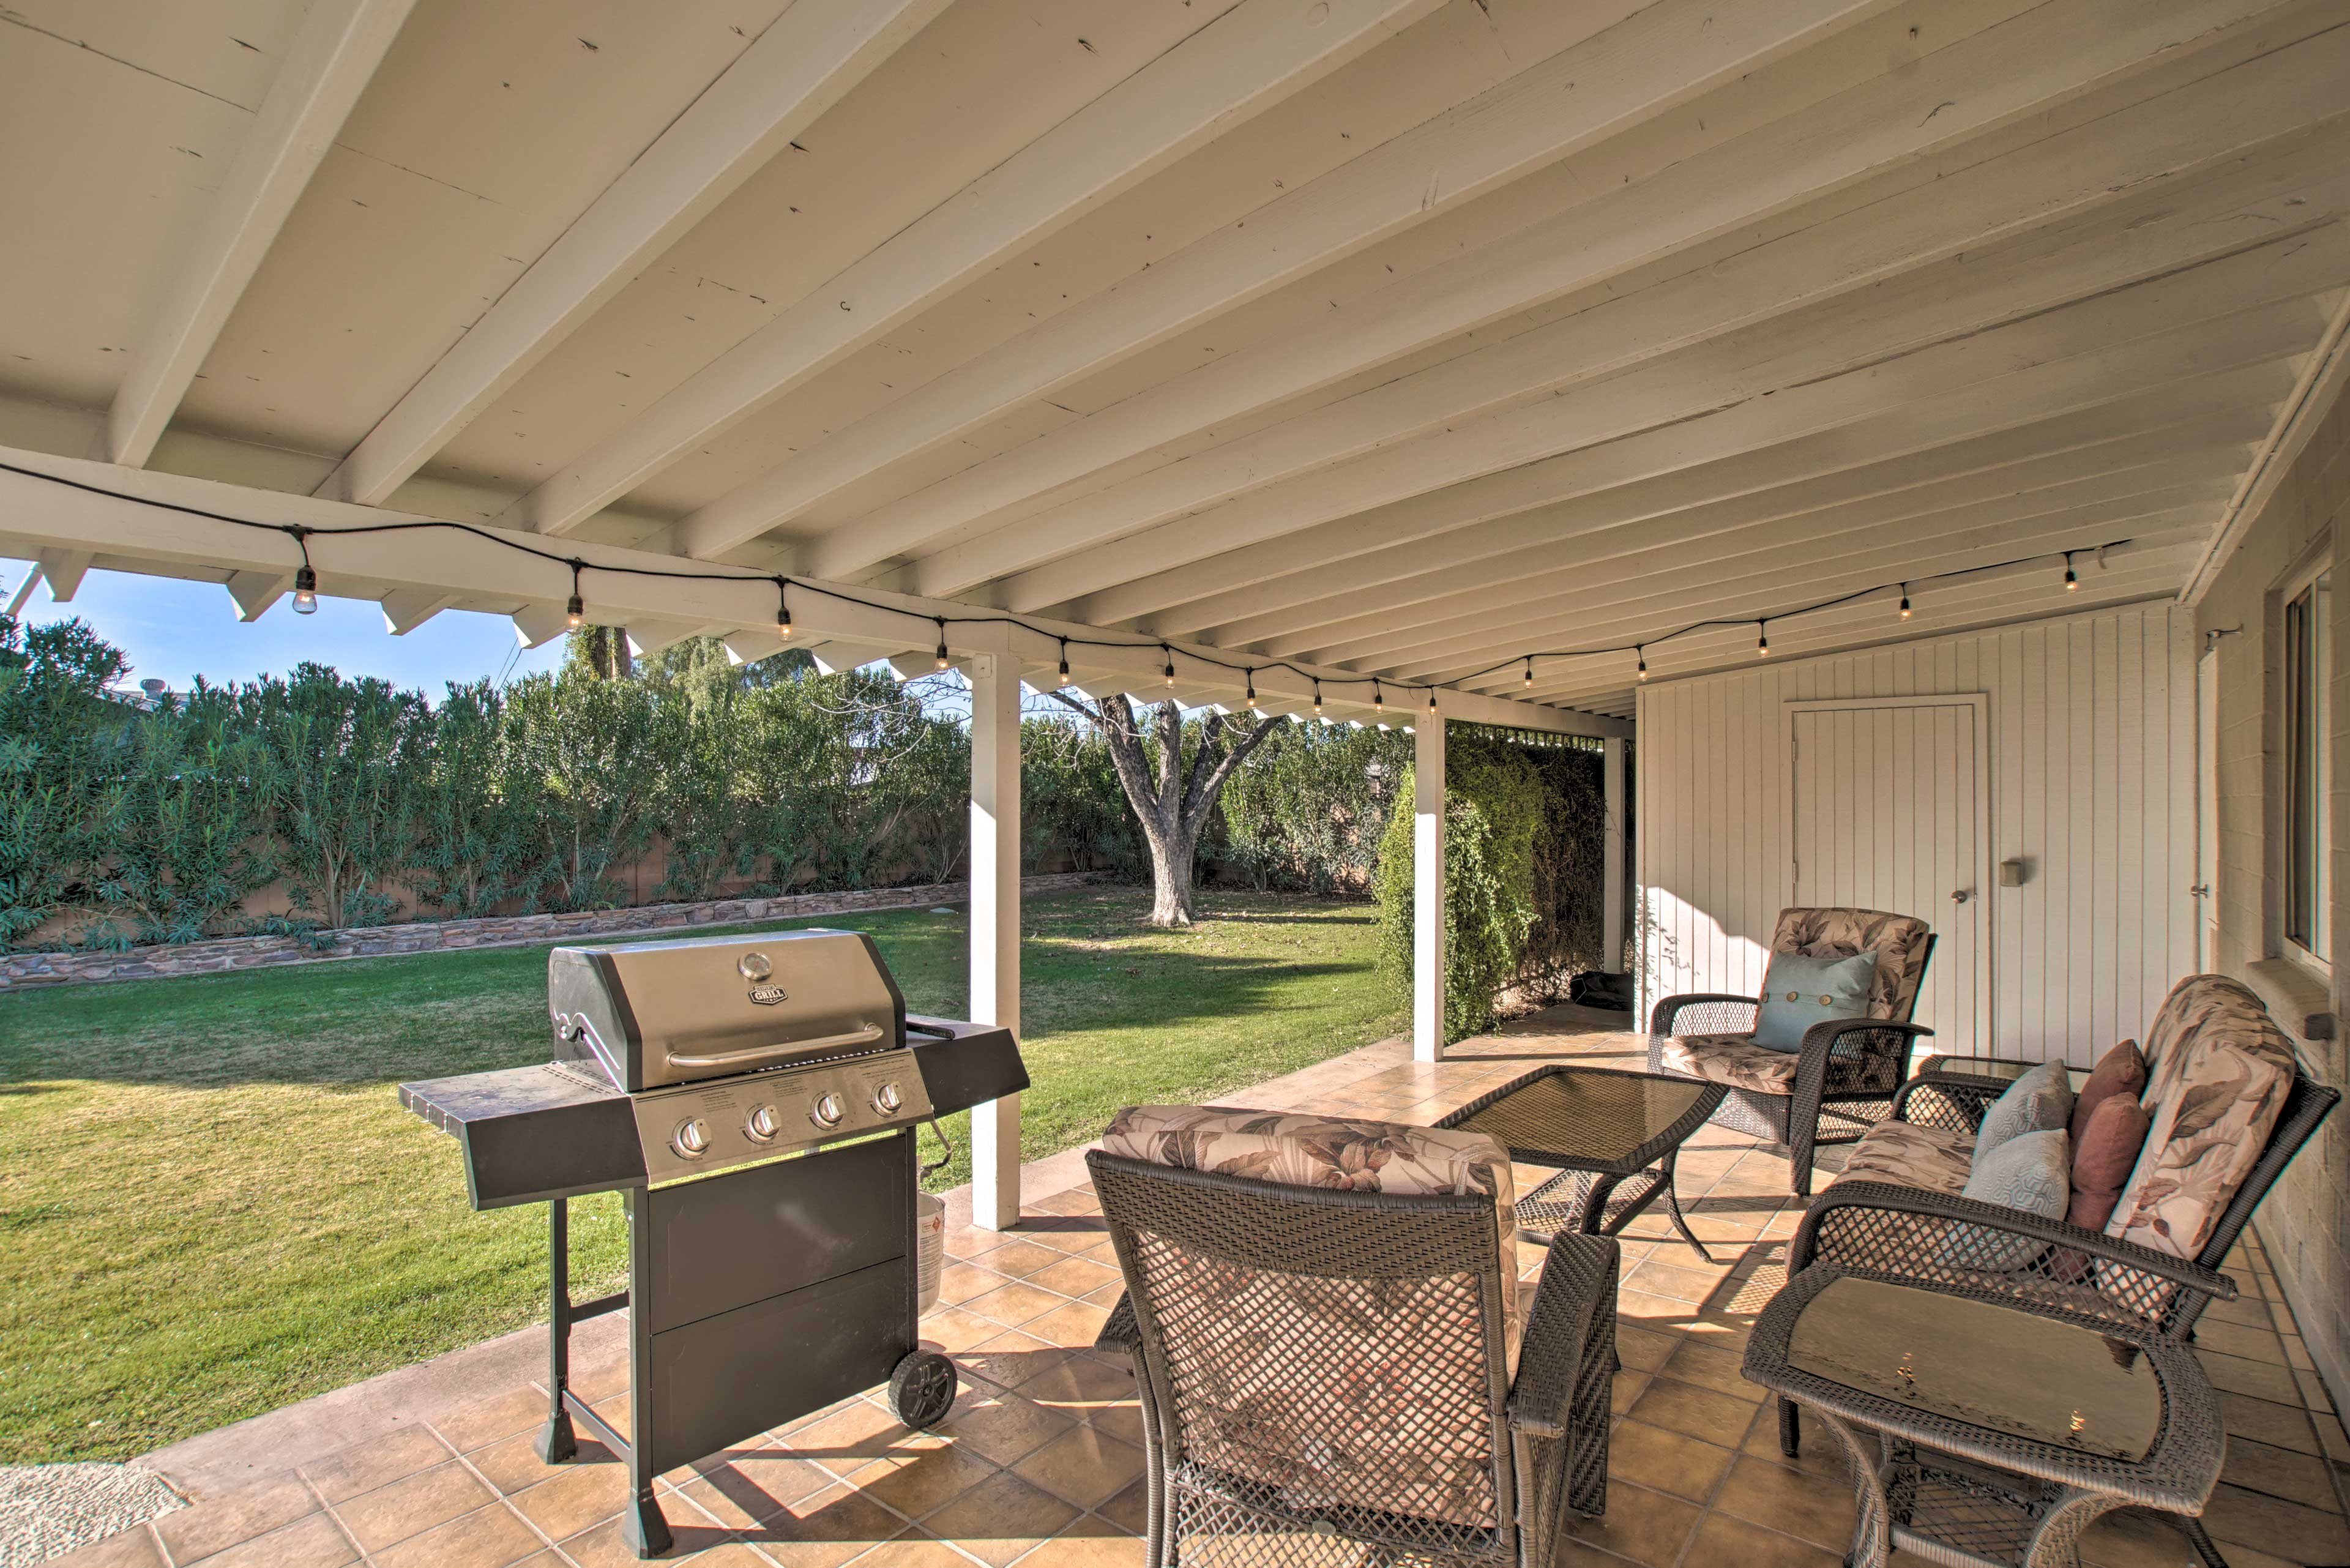 Covered Patio | Gas Grill | Seating Area | Spacious Yard